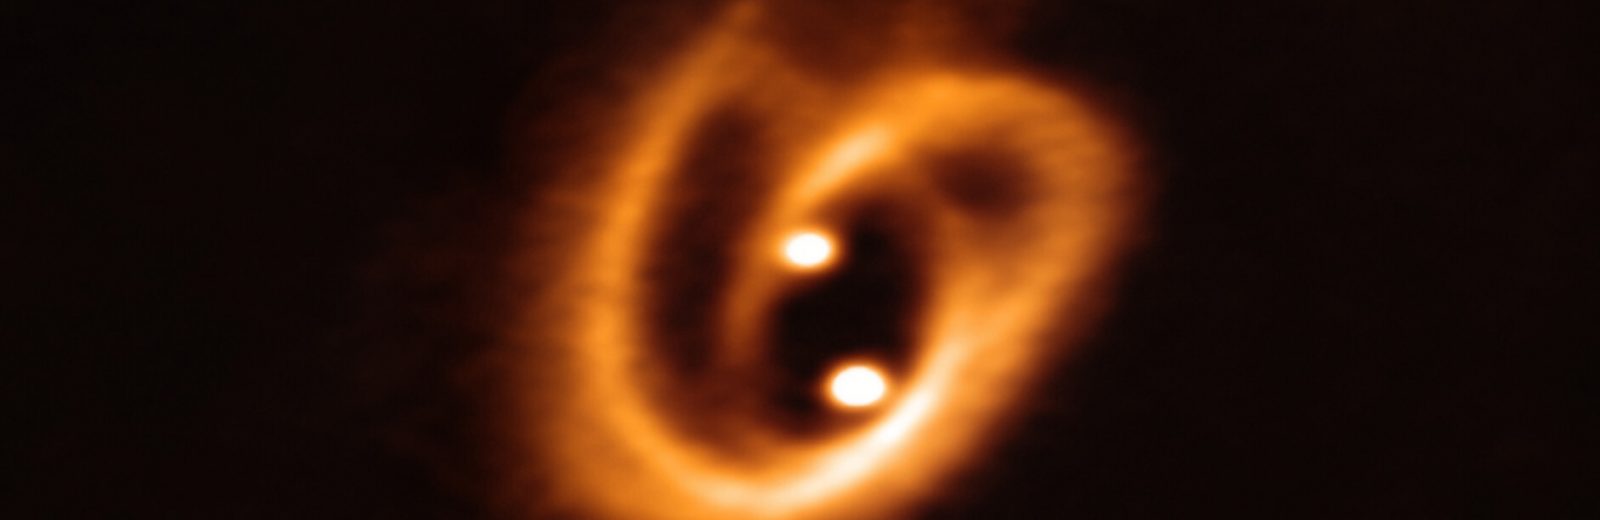 One cosmic pretzel for two baby stars